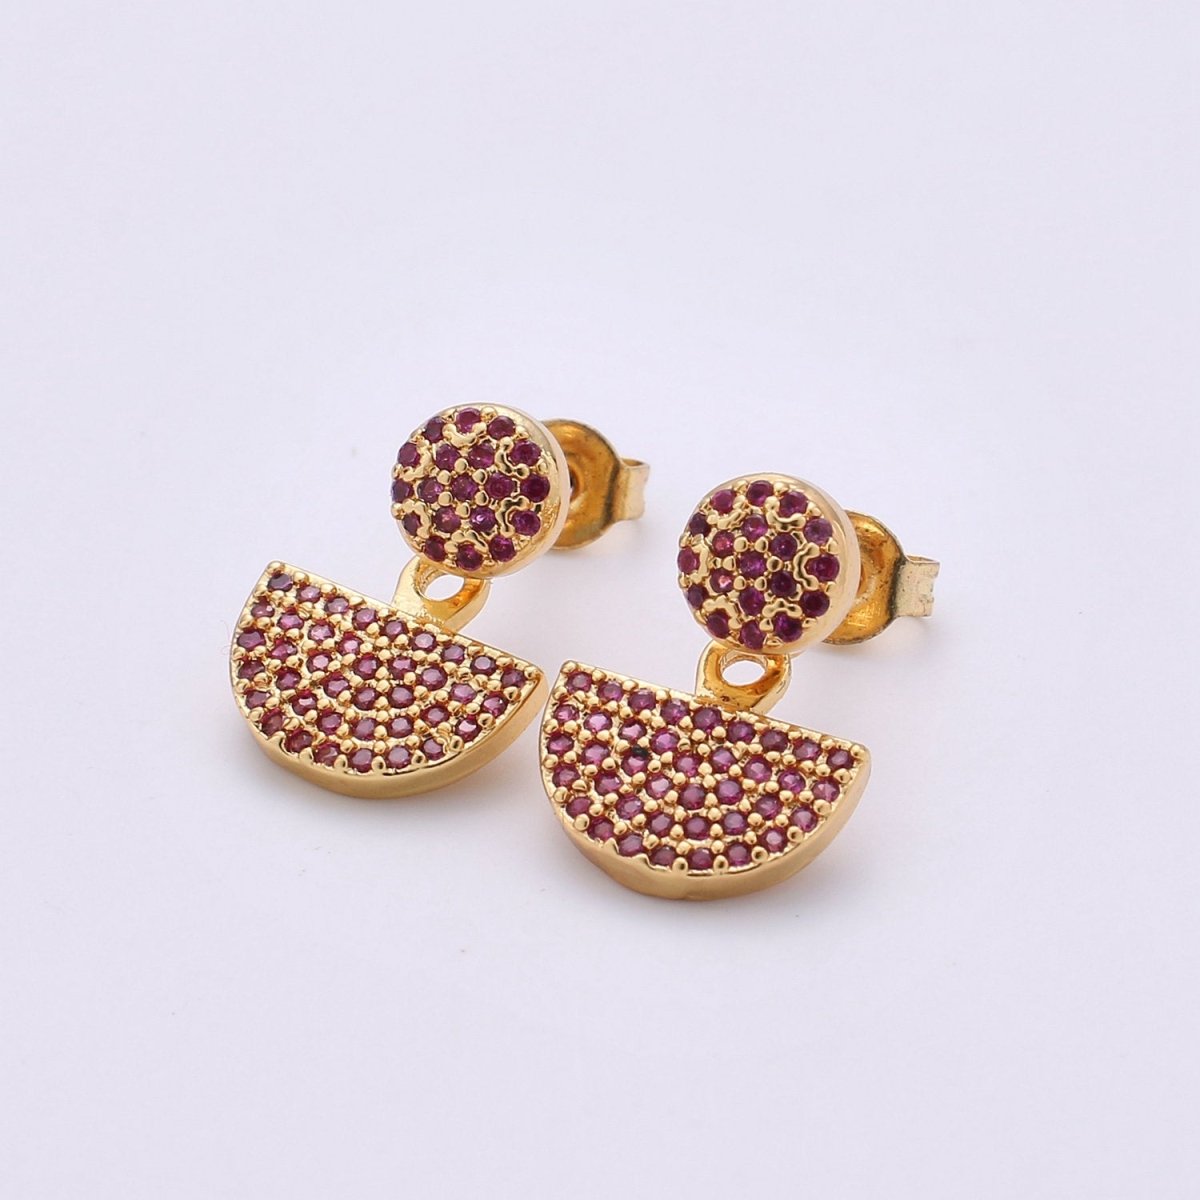 Dot and Fan Earrings, Gold Stud Earring 24K Gold Filled Post Earrings, Colorful Micro Pave Gold Dot and Fan Earrings, Tiny Gold StudS Q-268 - Q-270 - DLUXCA